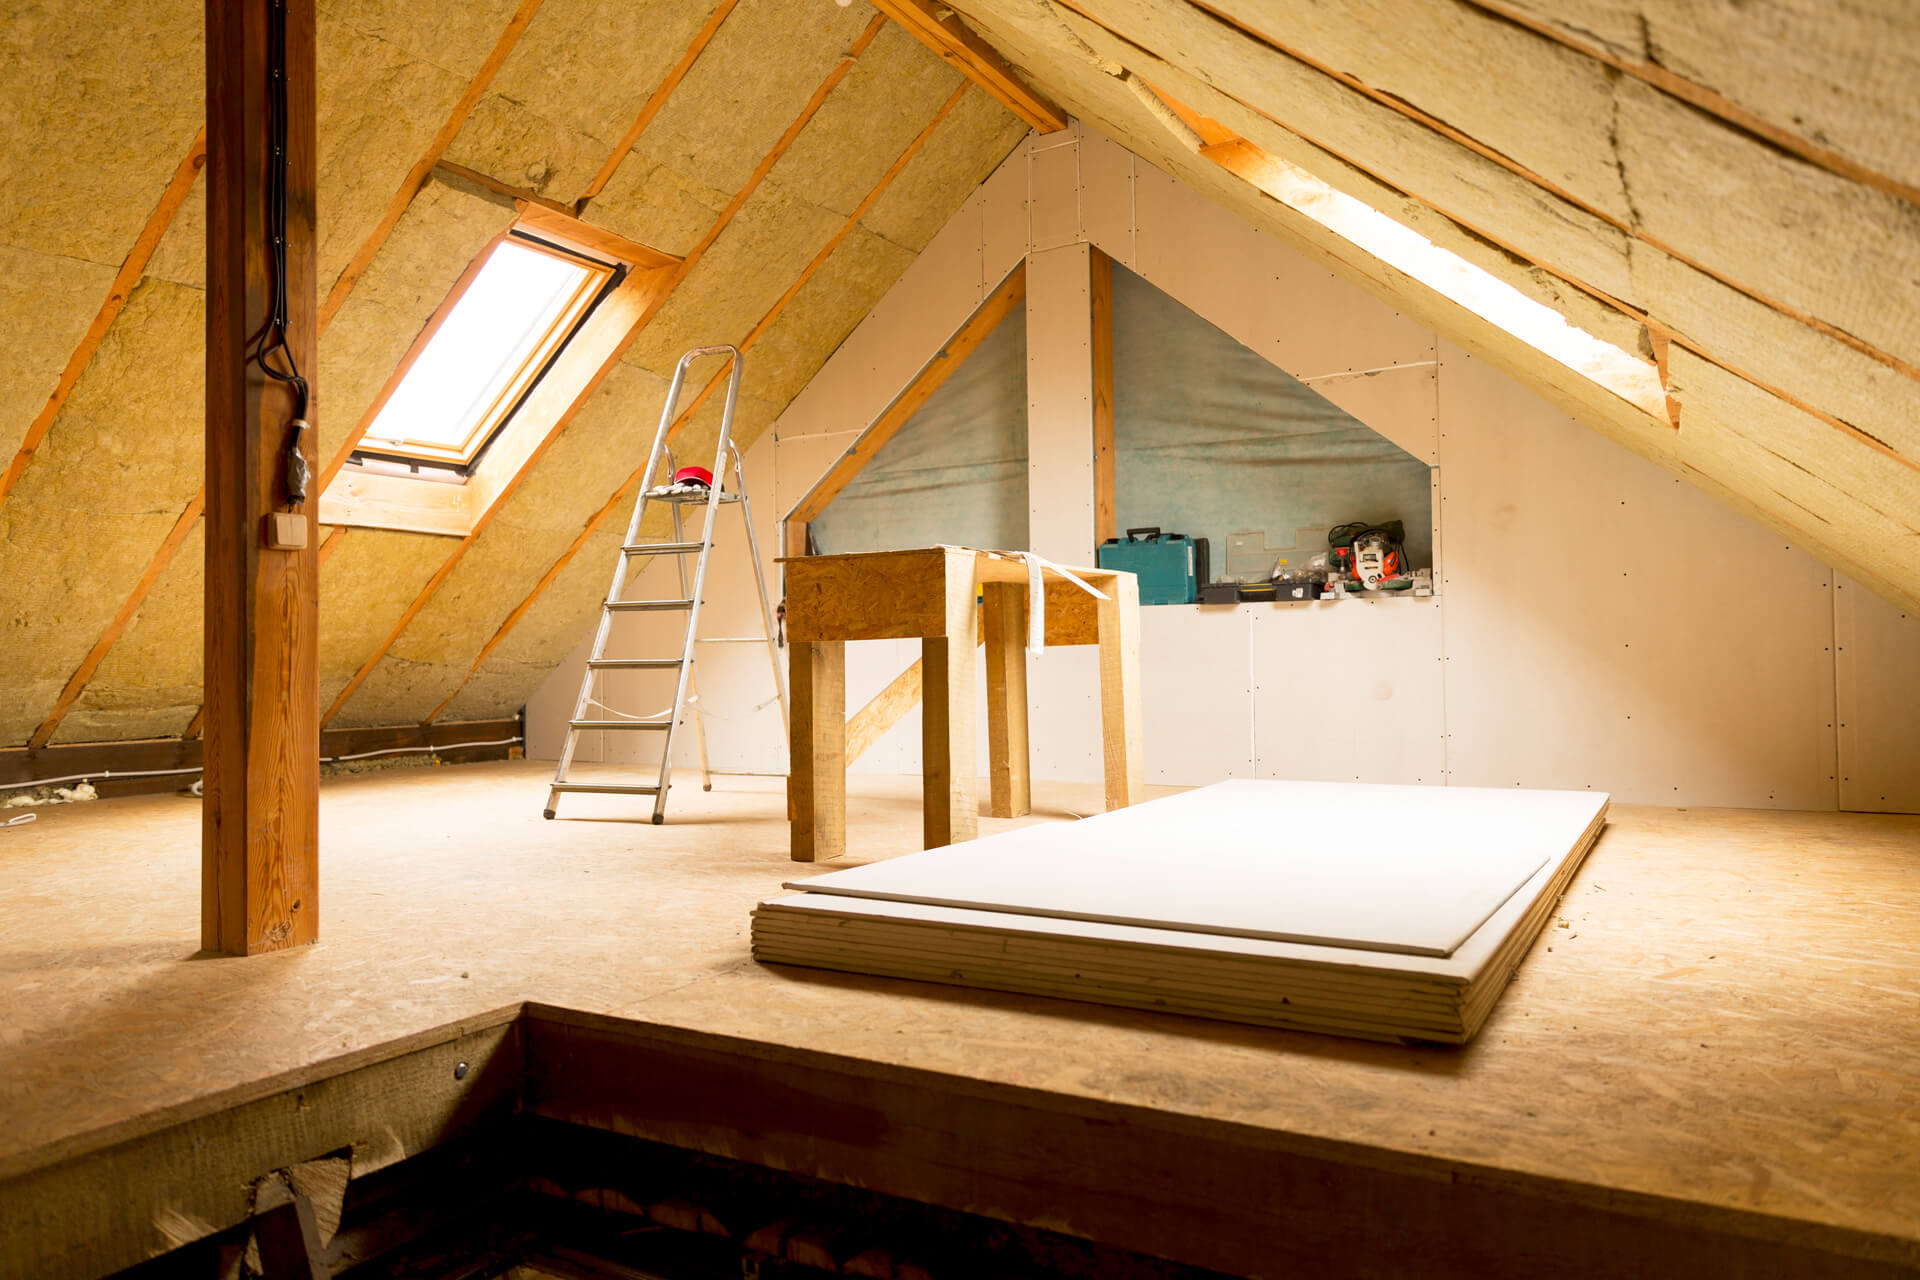 How To Insulate Roof In Attic